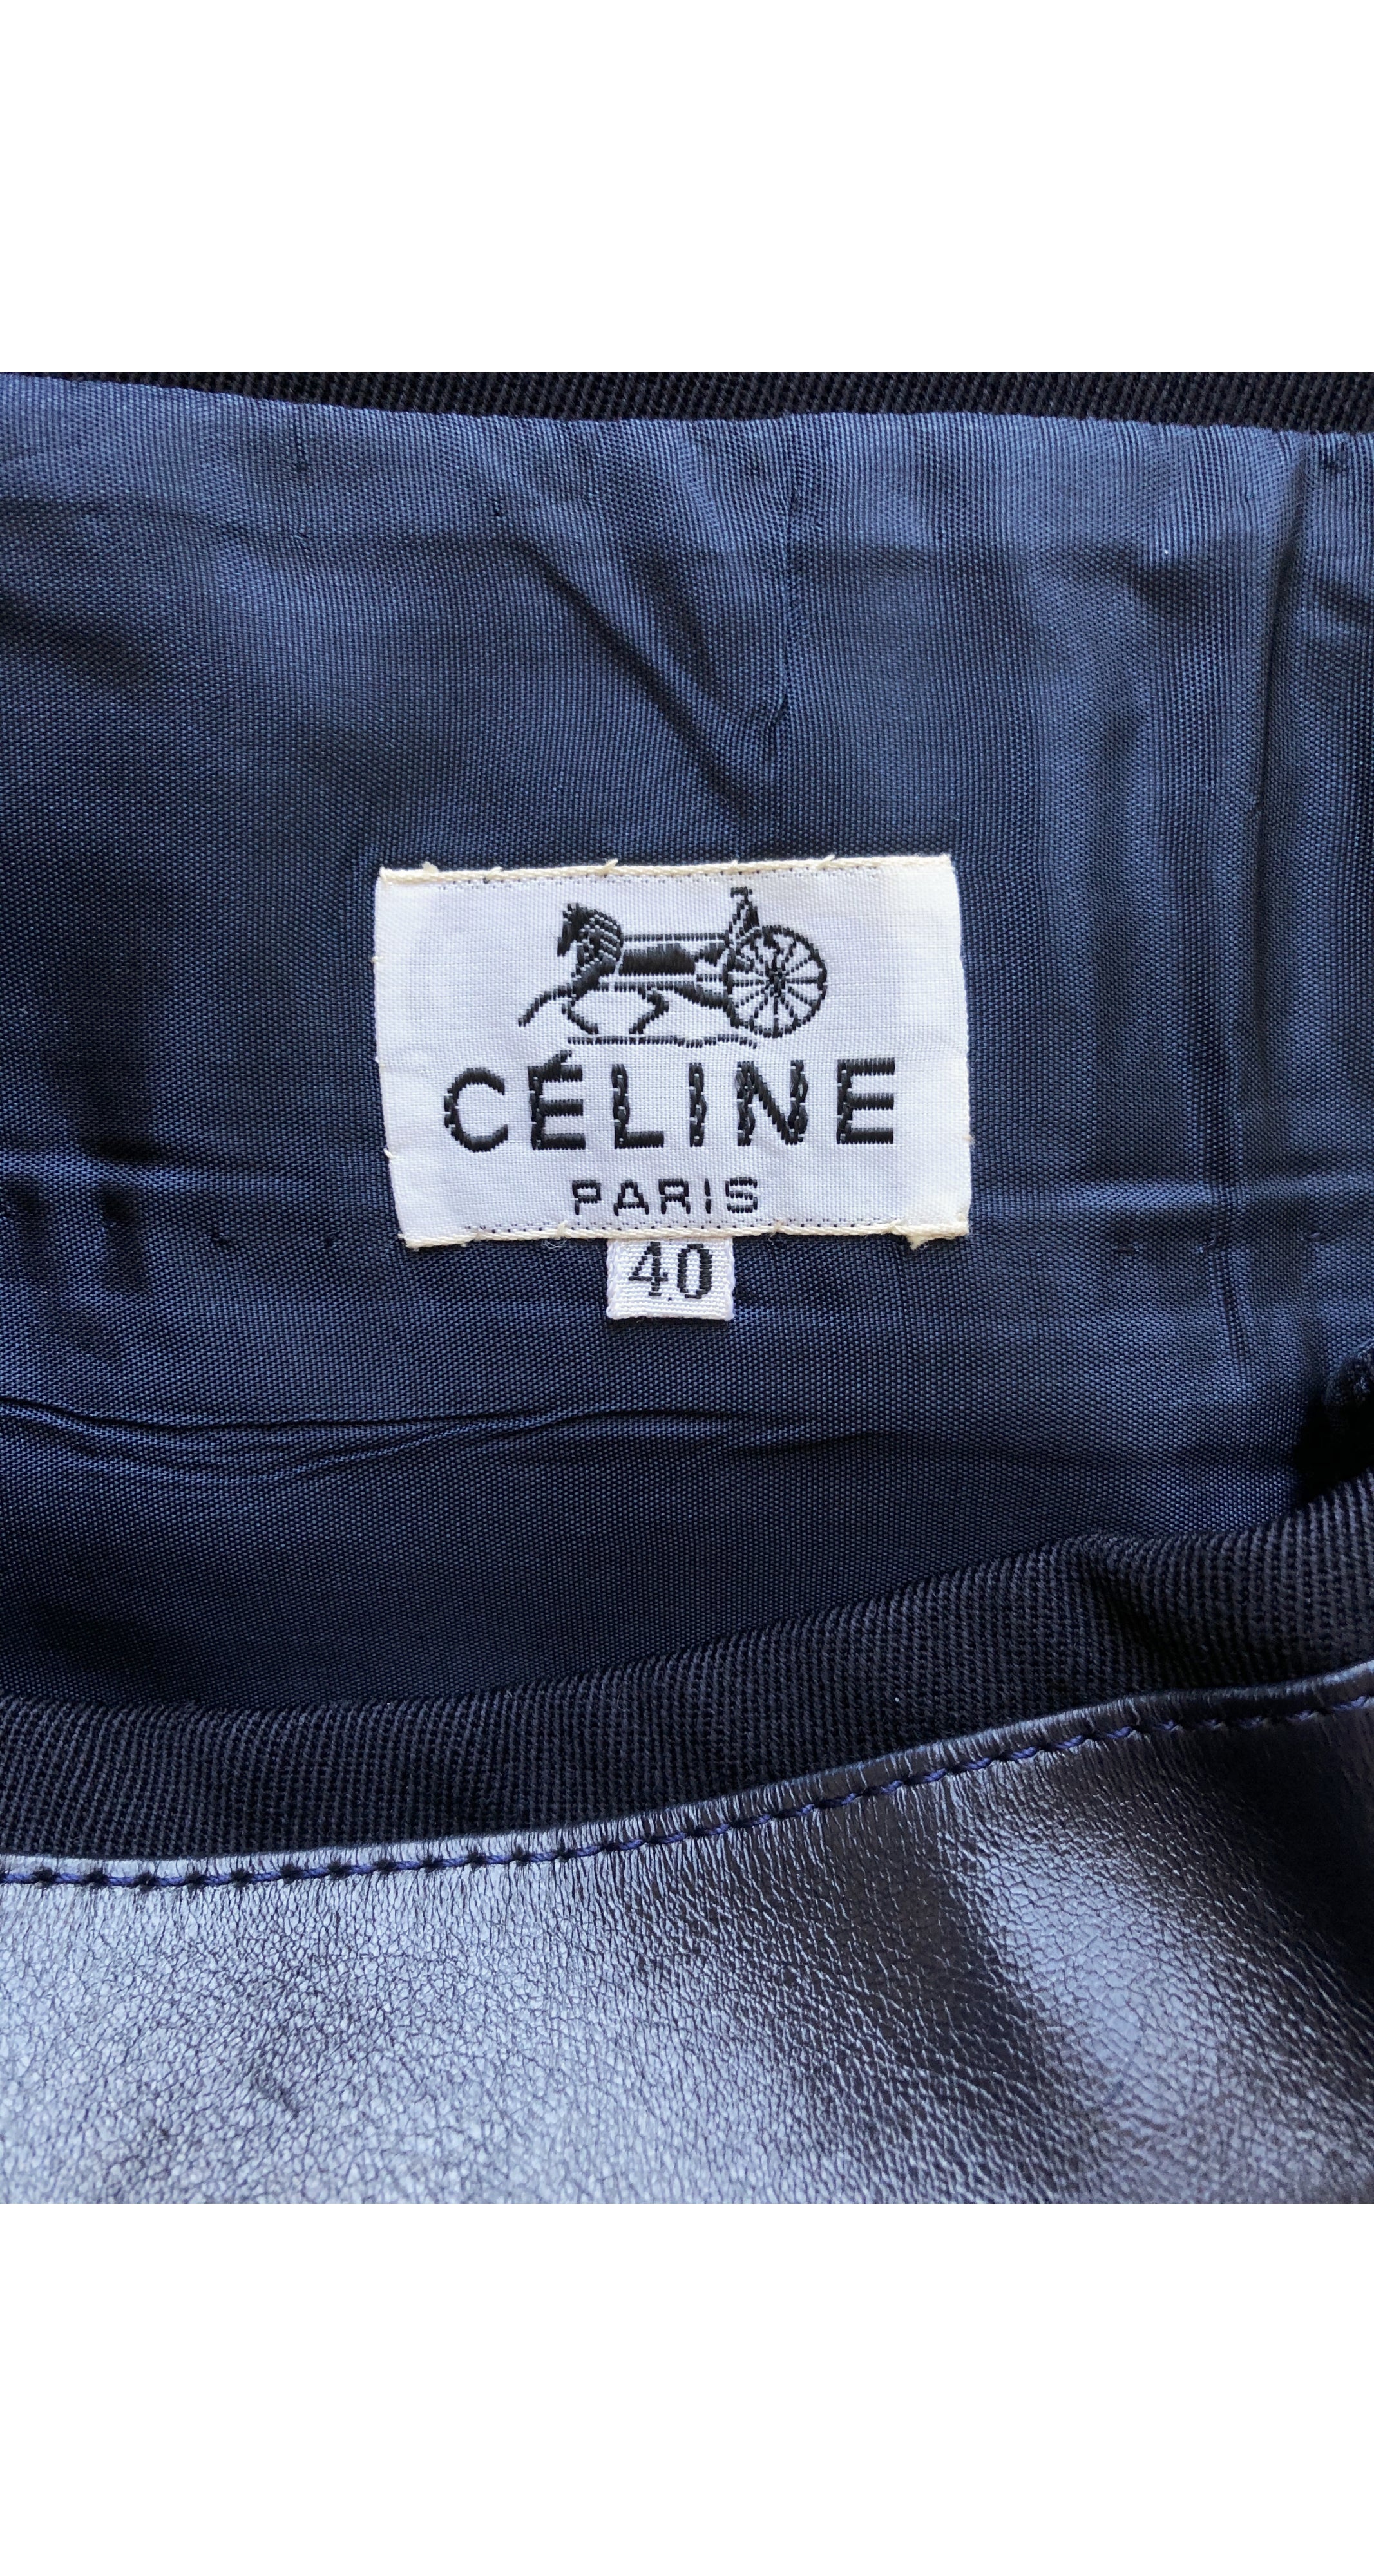 Céline 1970s Vintage Navy Worsted Wool & Leather Wrap Skirt ...